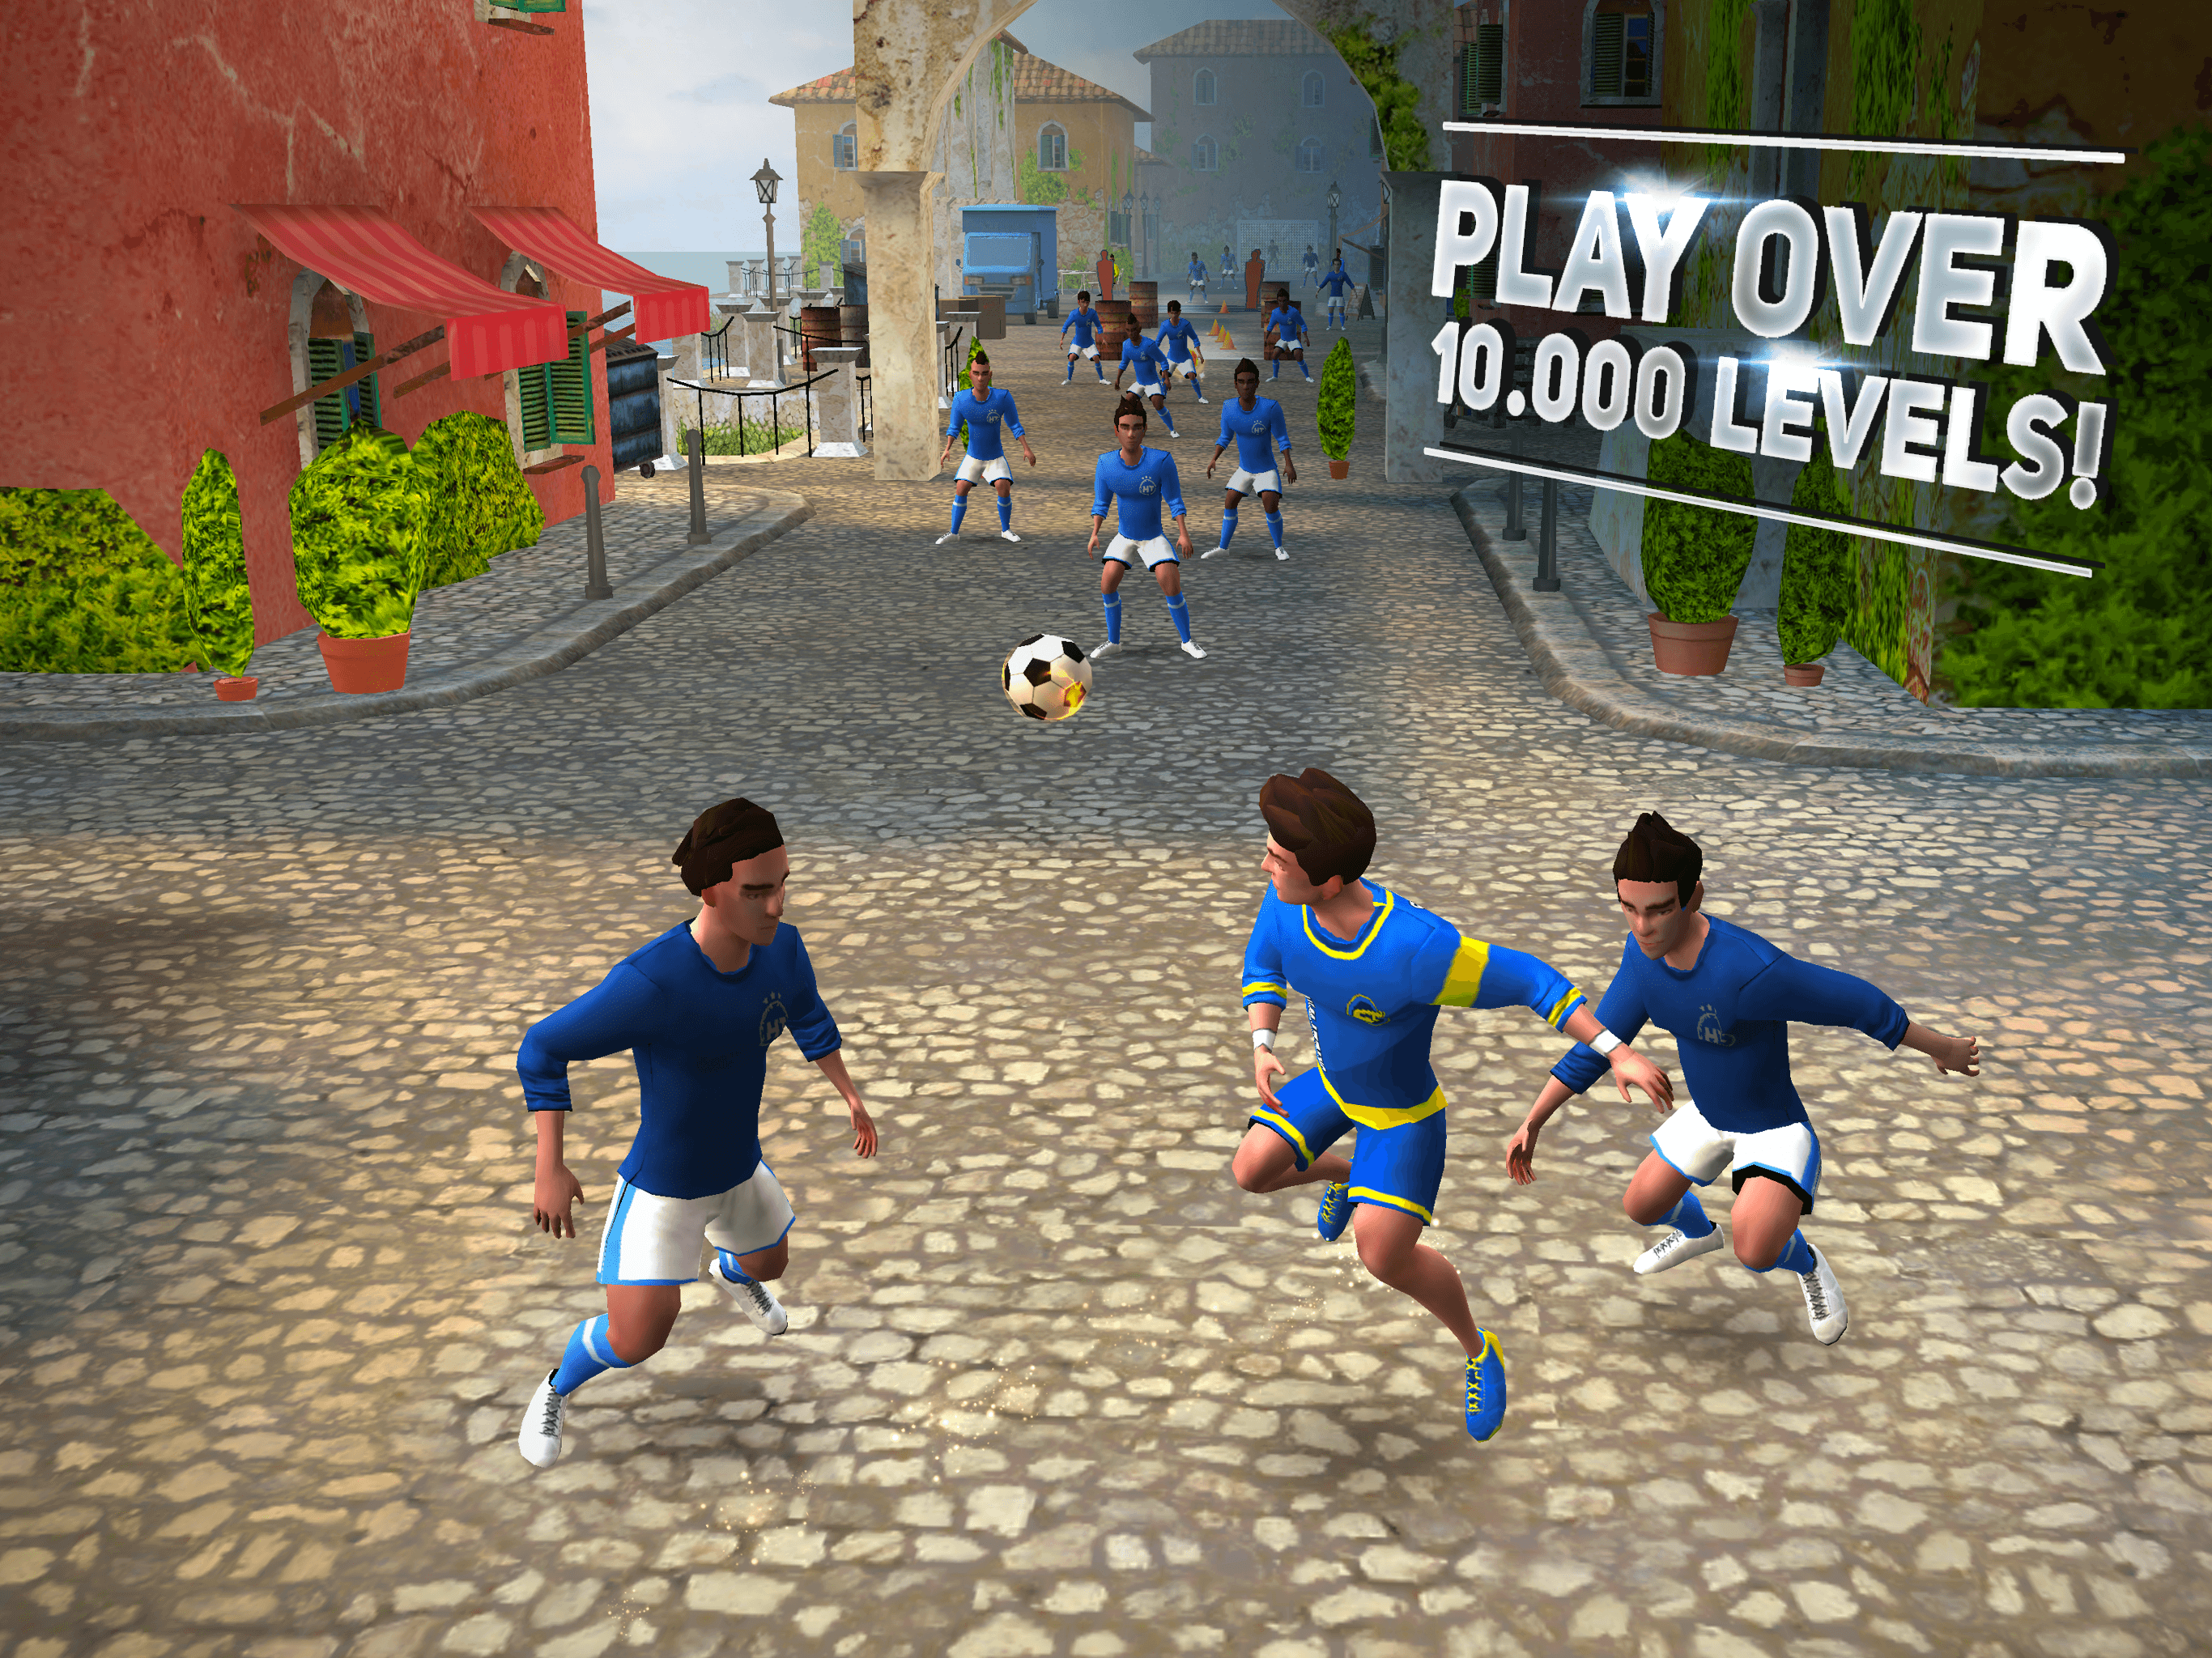 Download SkillTwins Football Game 2 on PC with BlueStacks